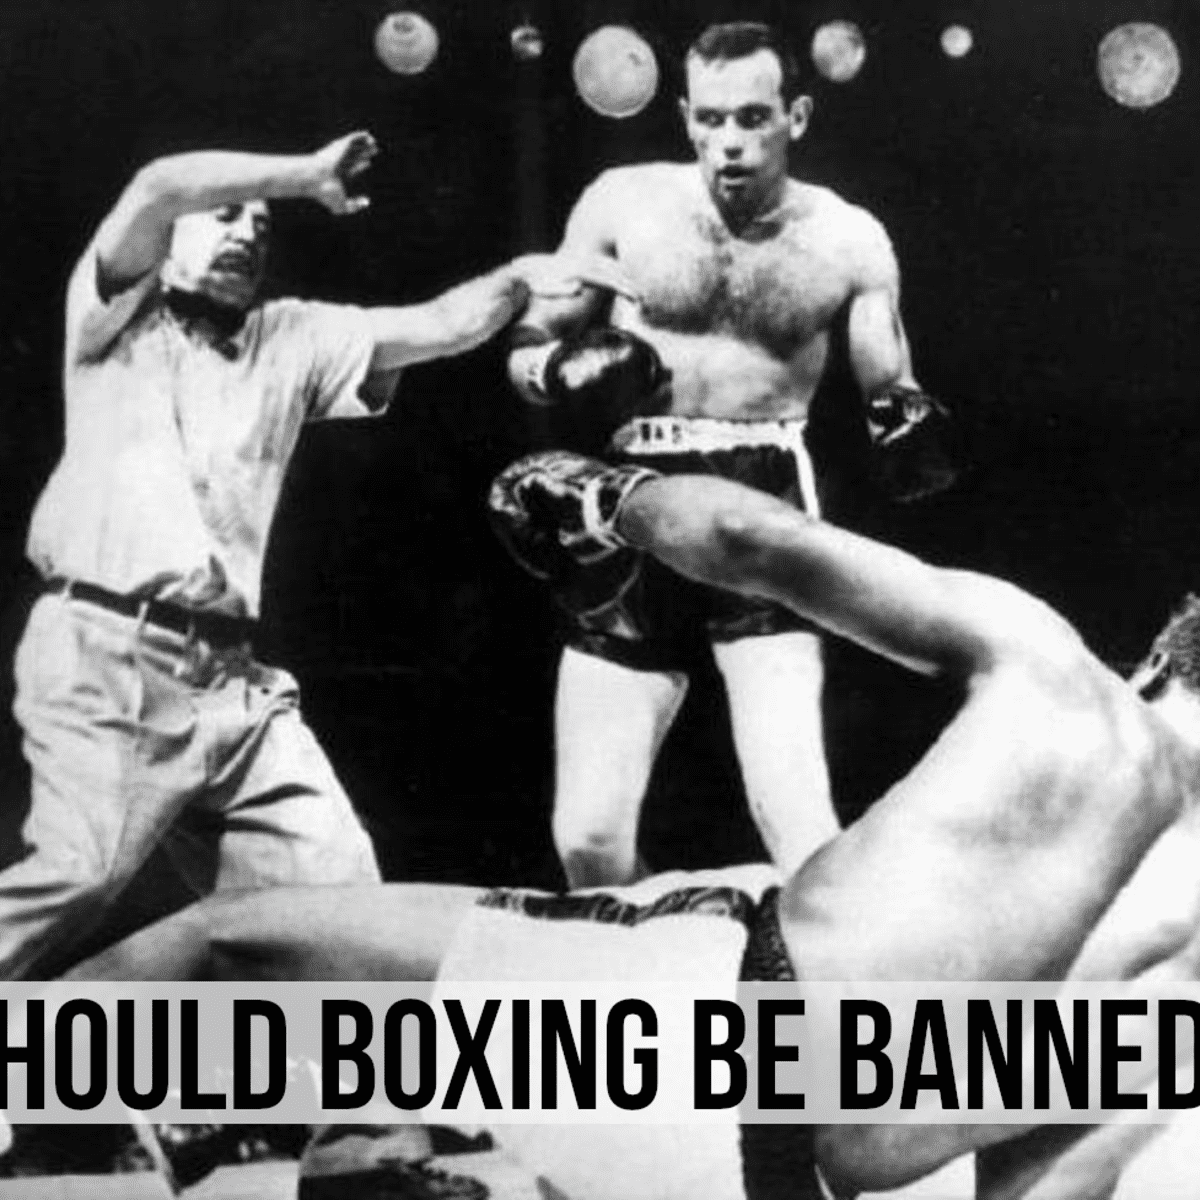 10 reasons why boxing should not be banned